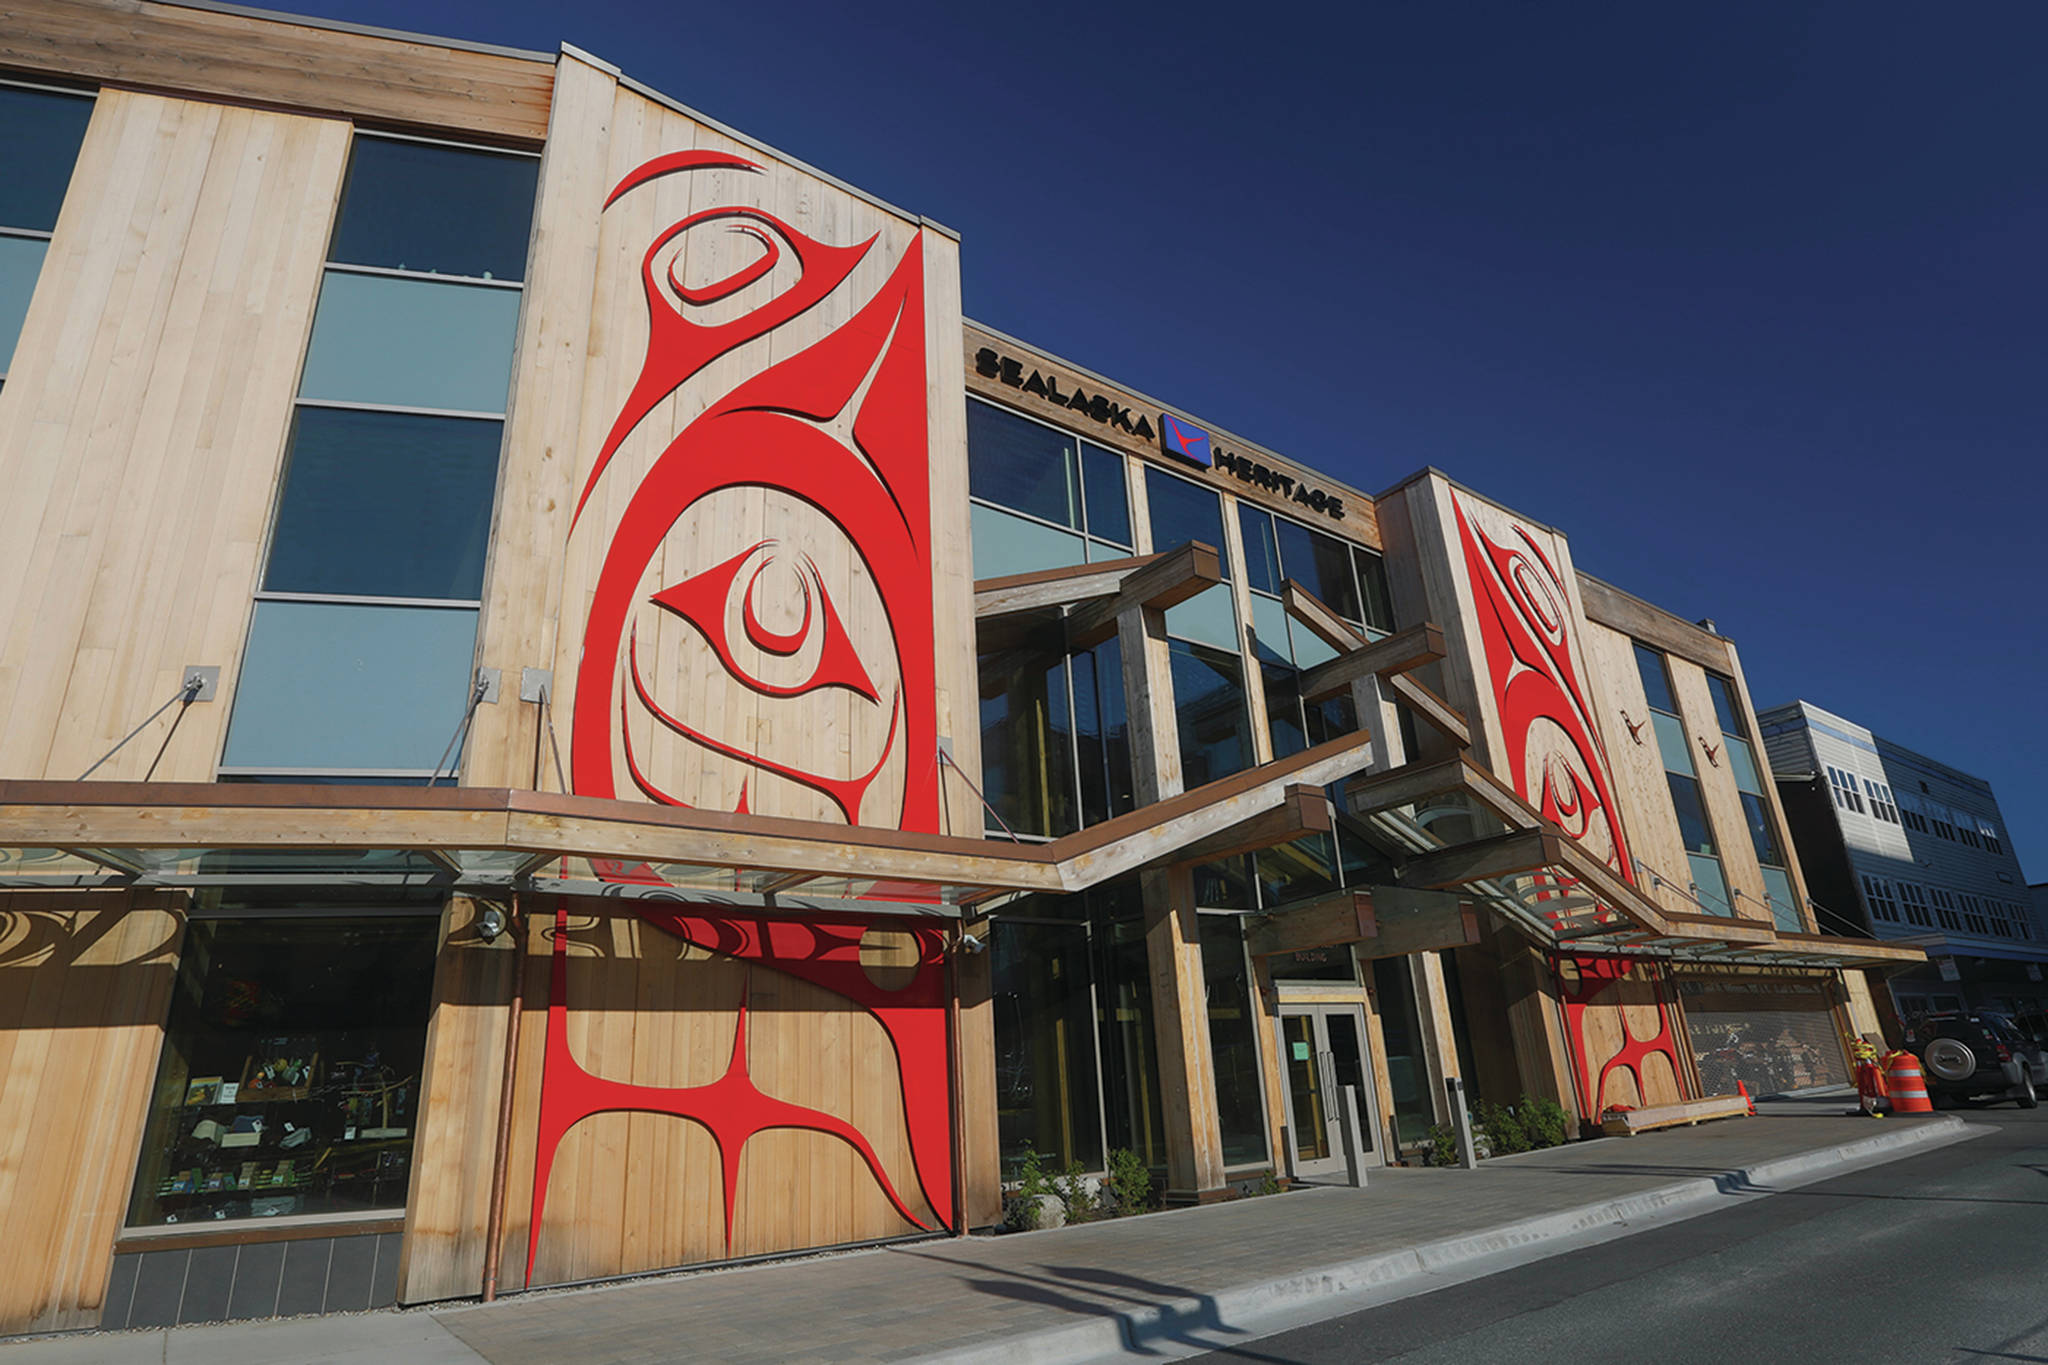 Sealaska Heritage Institute’s Walter Soboleff Building was recently awarded a Leadership in Energy and Environmental Design Gold rating by the United States Green Building Council. (Courtesy Photo | Sealaska Heritage Institute)